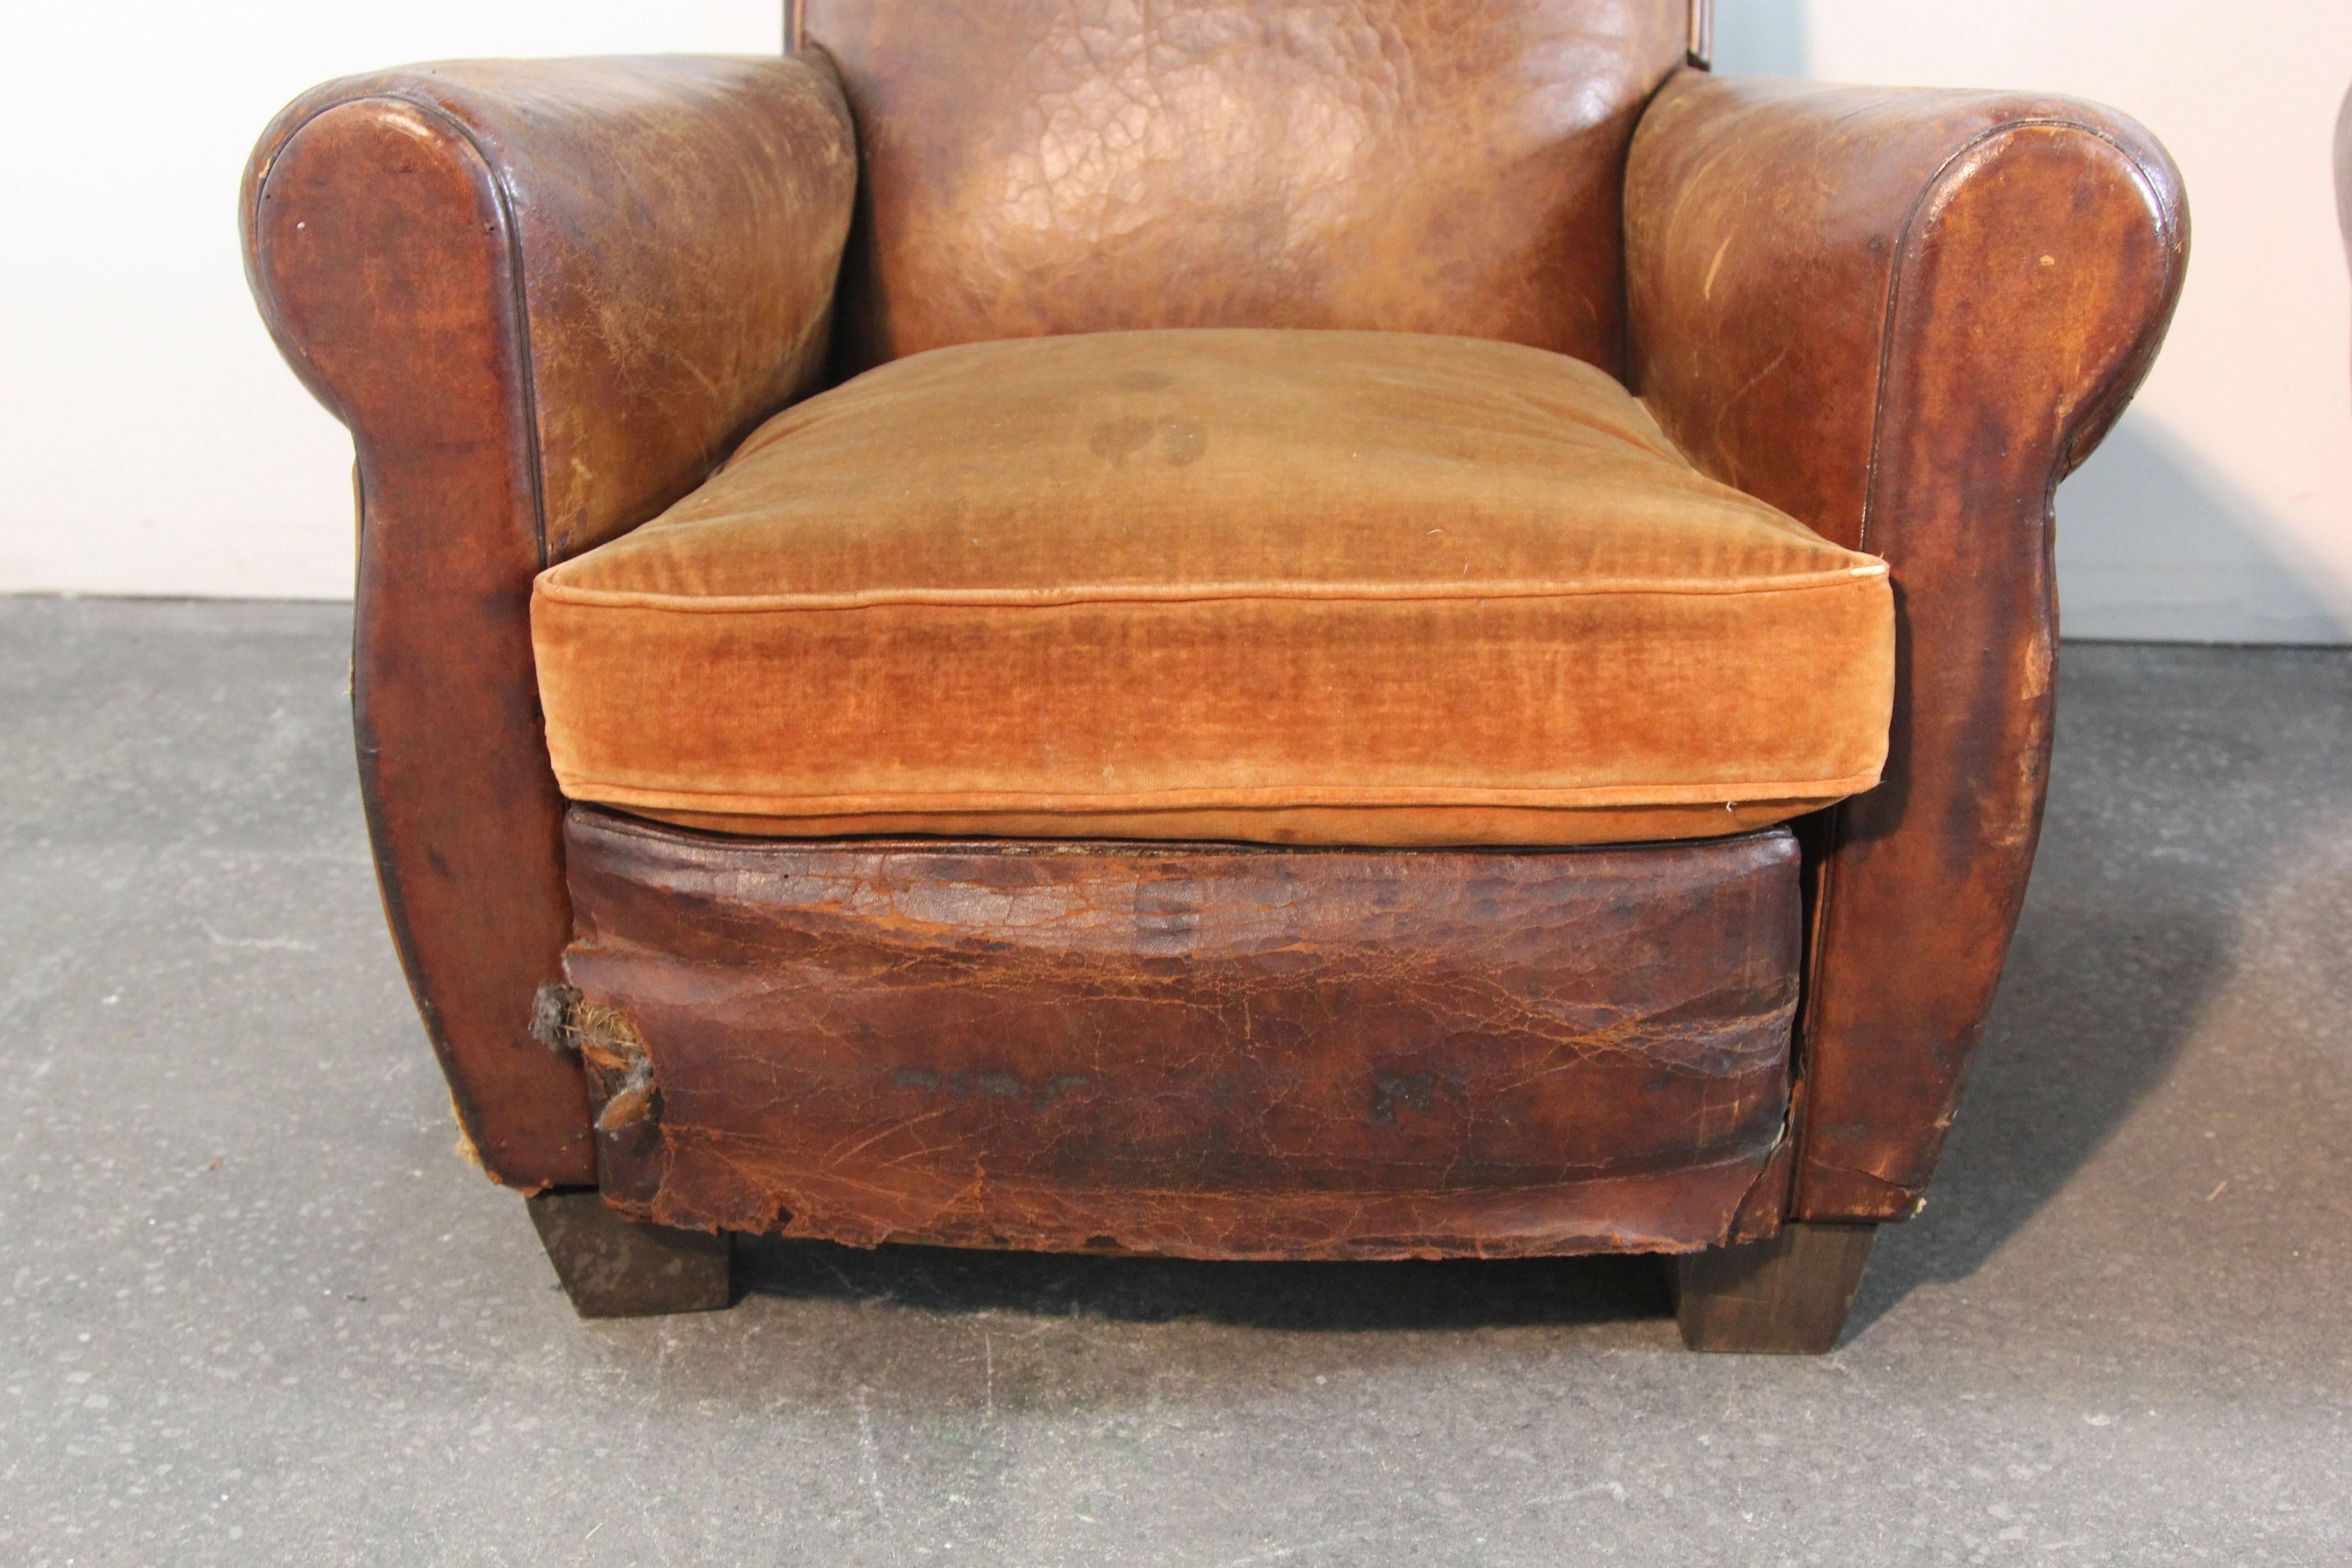 Incredible pair of original Art Deco style club chairs. In original distressed leather and velvet cushion. This is an assembled pair or chairs, as they do not match exactly, but they are very close and work well together. Distressed leather